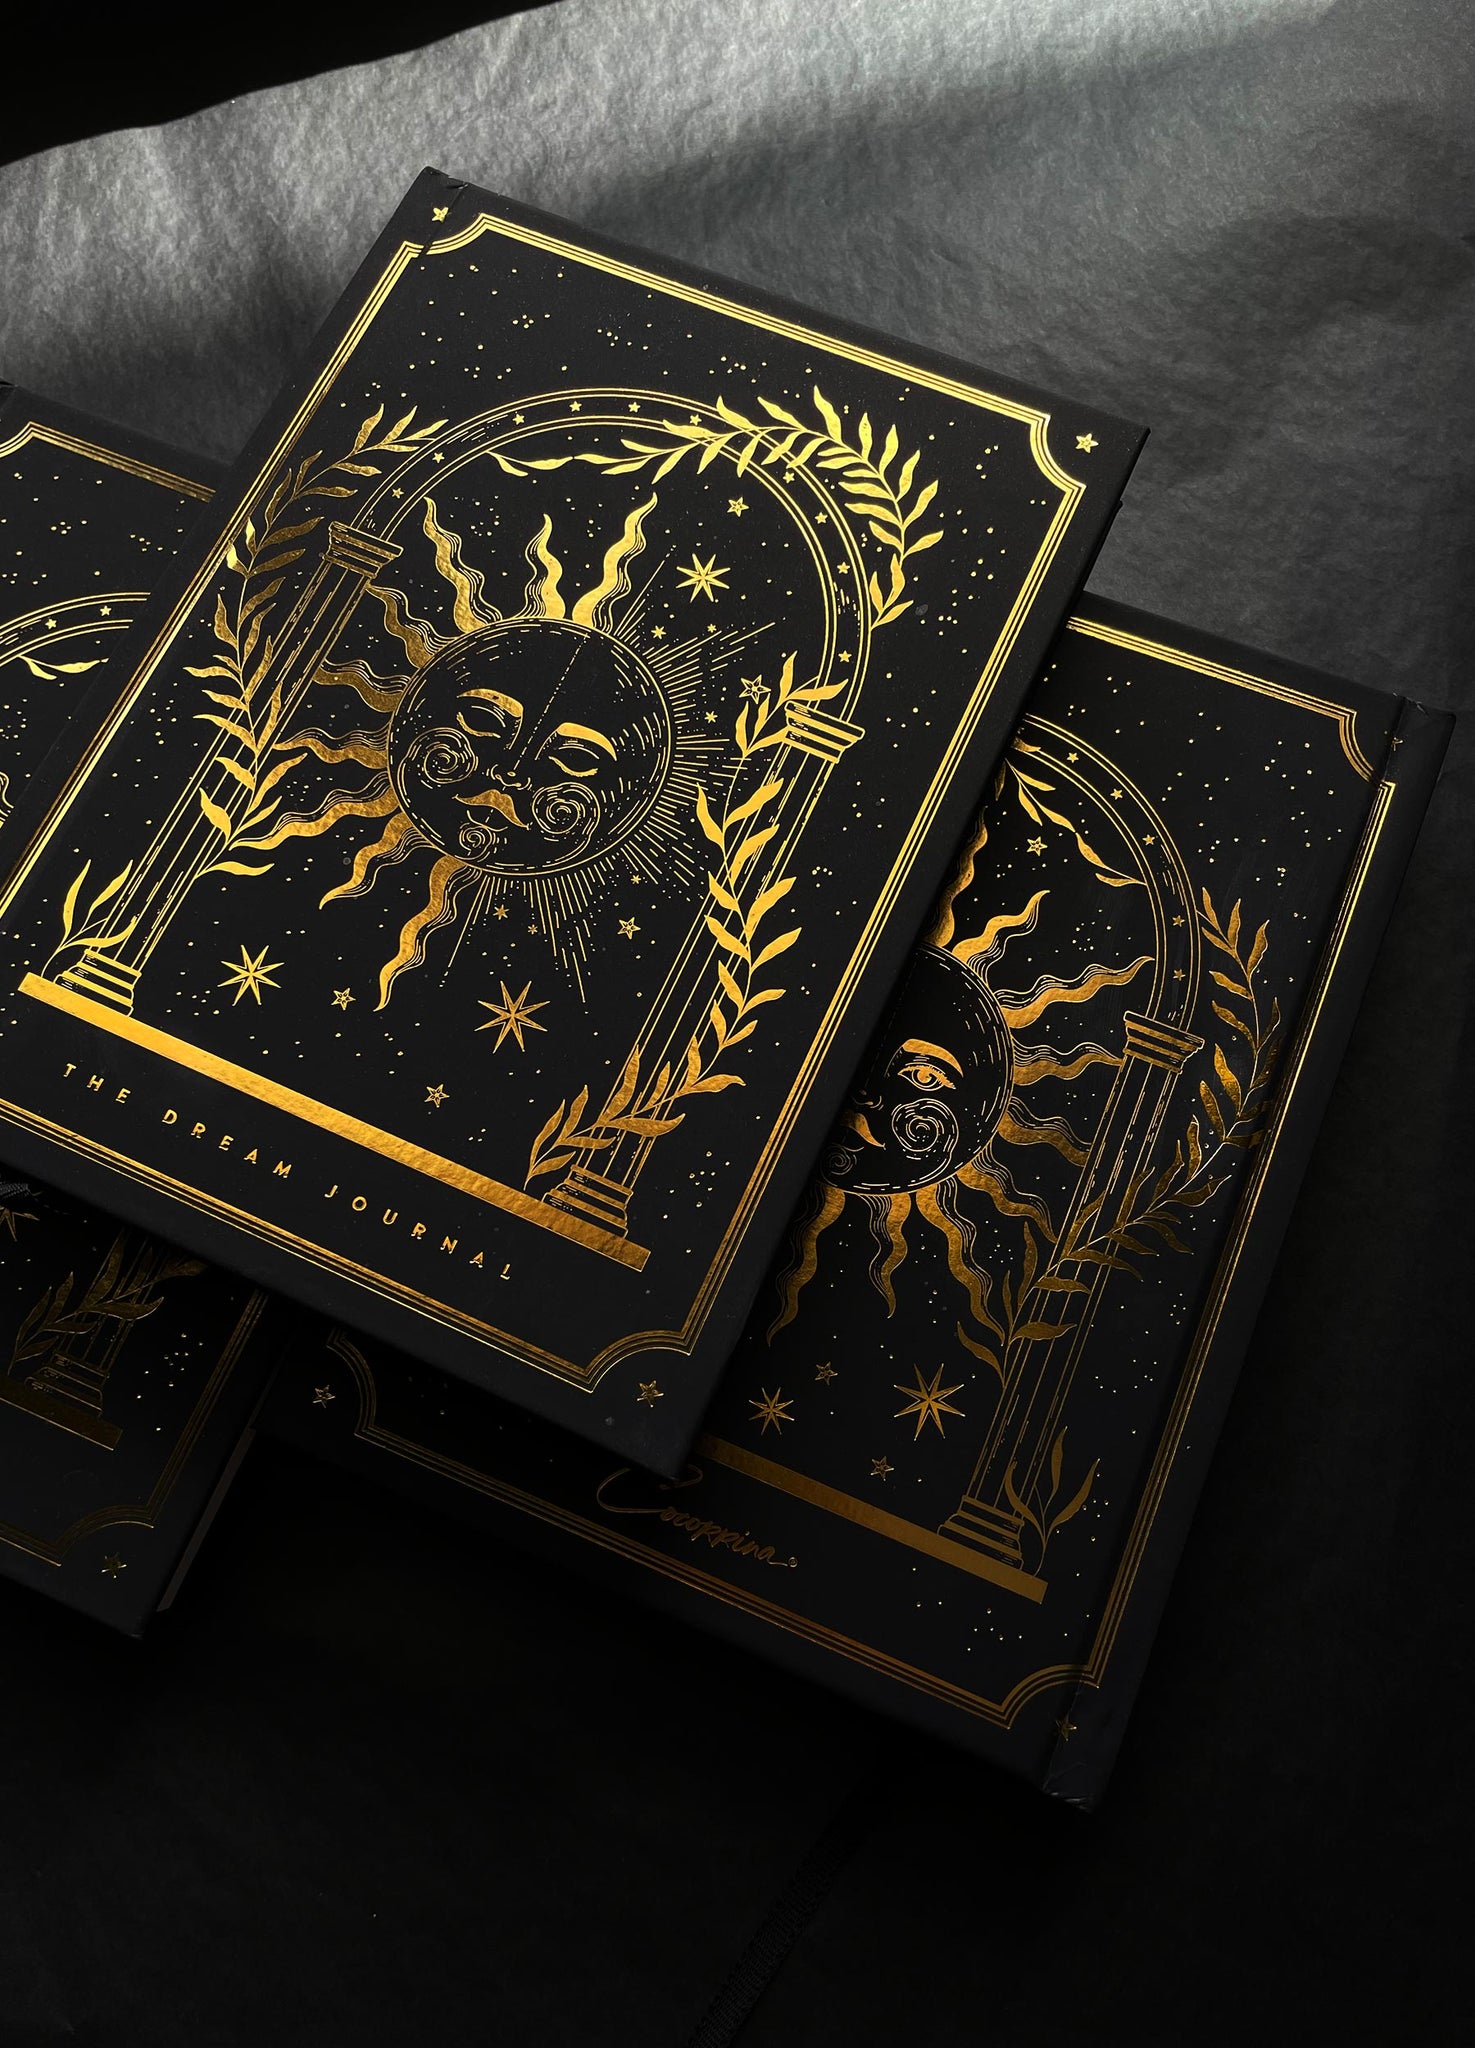 Tarot & Dream Journal Bundle. Gold foil and black hardcover books, themed journals by Cocorrina & Co